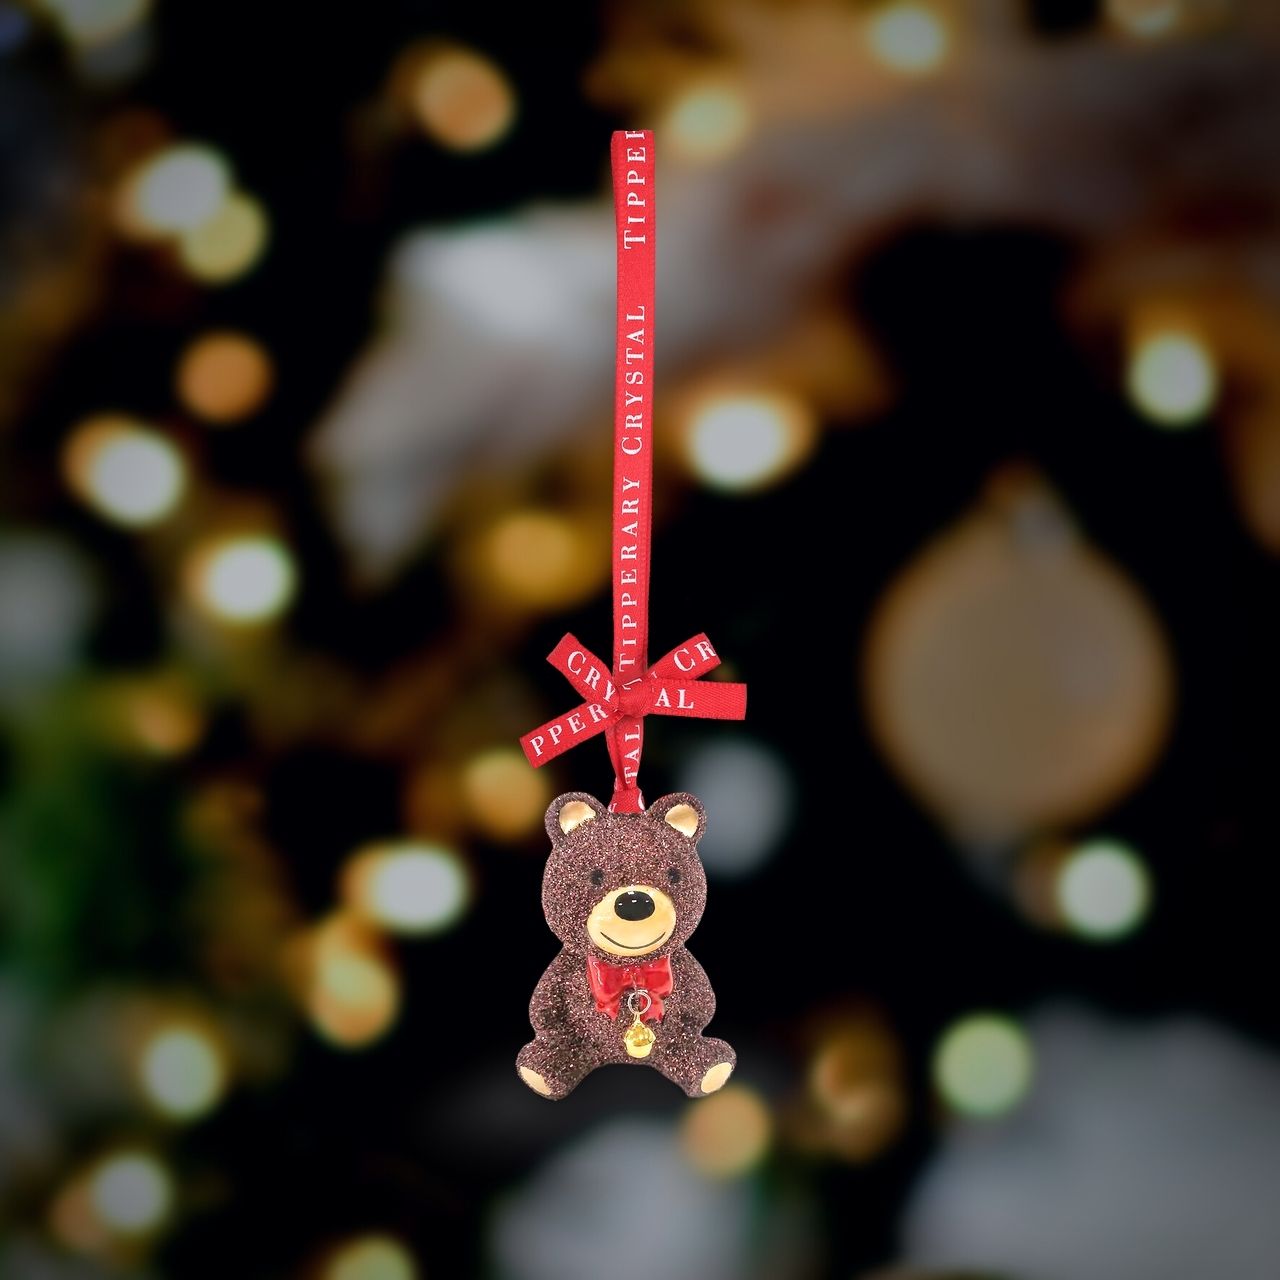 Porcelain Decoration - Teddy Bear Christmas Ornament - NEW 2022  We just Love Christmas! The festive season, the giving of gifts, creating memories and being together with family and loved ones. Have lots of fun with our lovingly designed and created Christmas decorations, each one has a magic sparkle of elf dust!